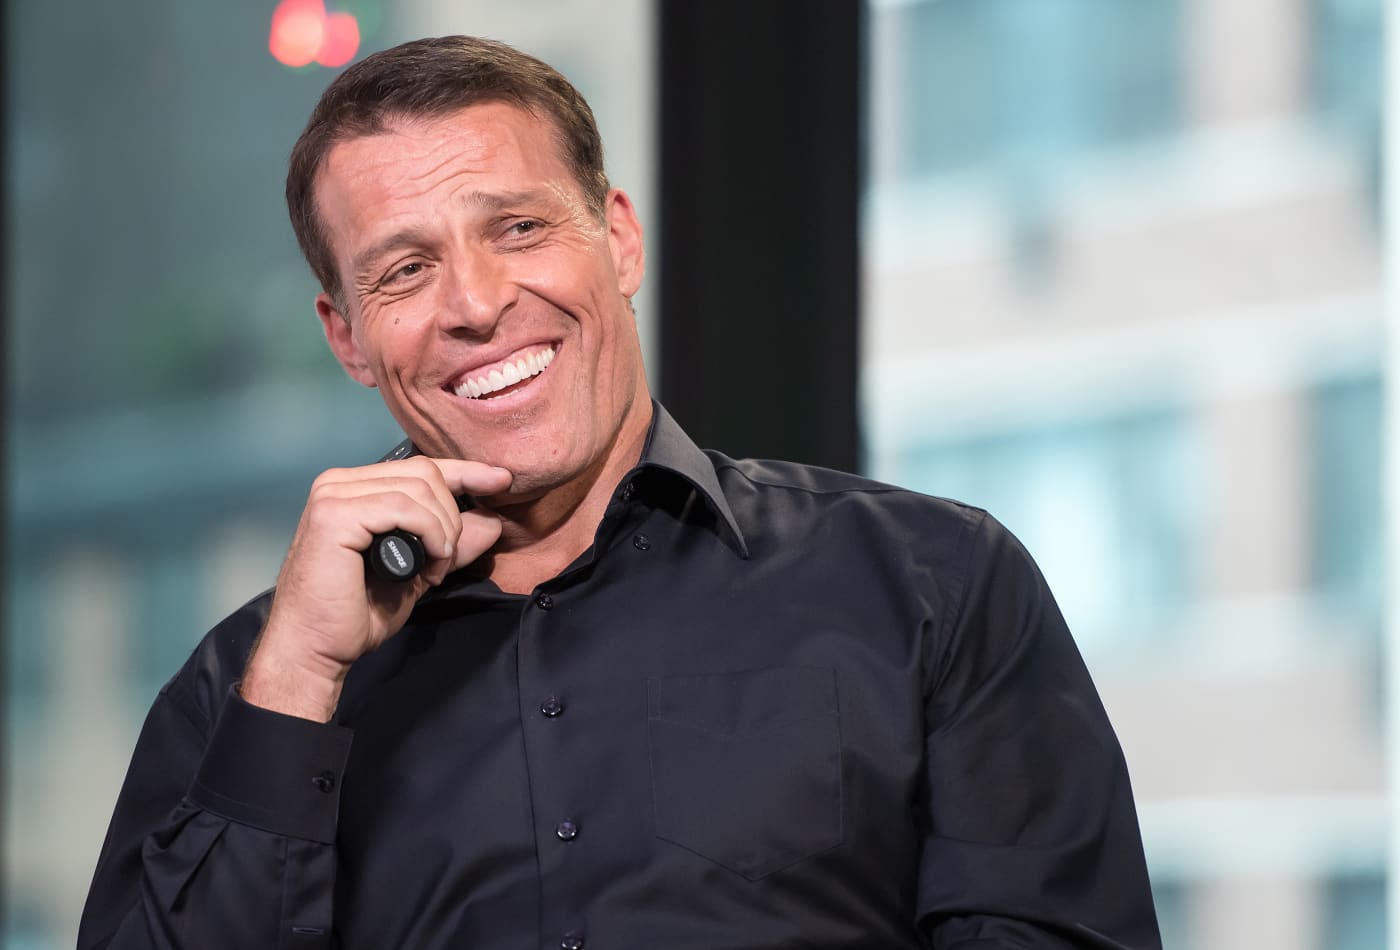 The 63-year old son of father (?) and mother(?) Tony Robbins in 2023 photo. Tony Robbins earned a  million dollar salary - leaving the net worth at  million in 2023